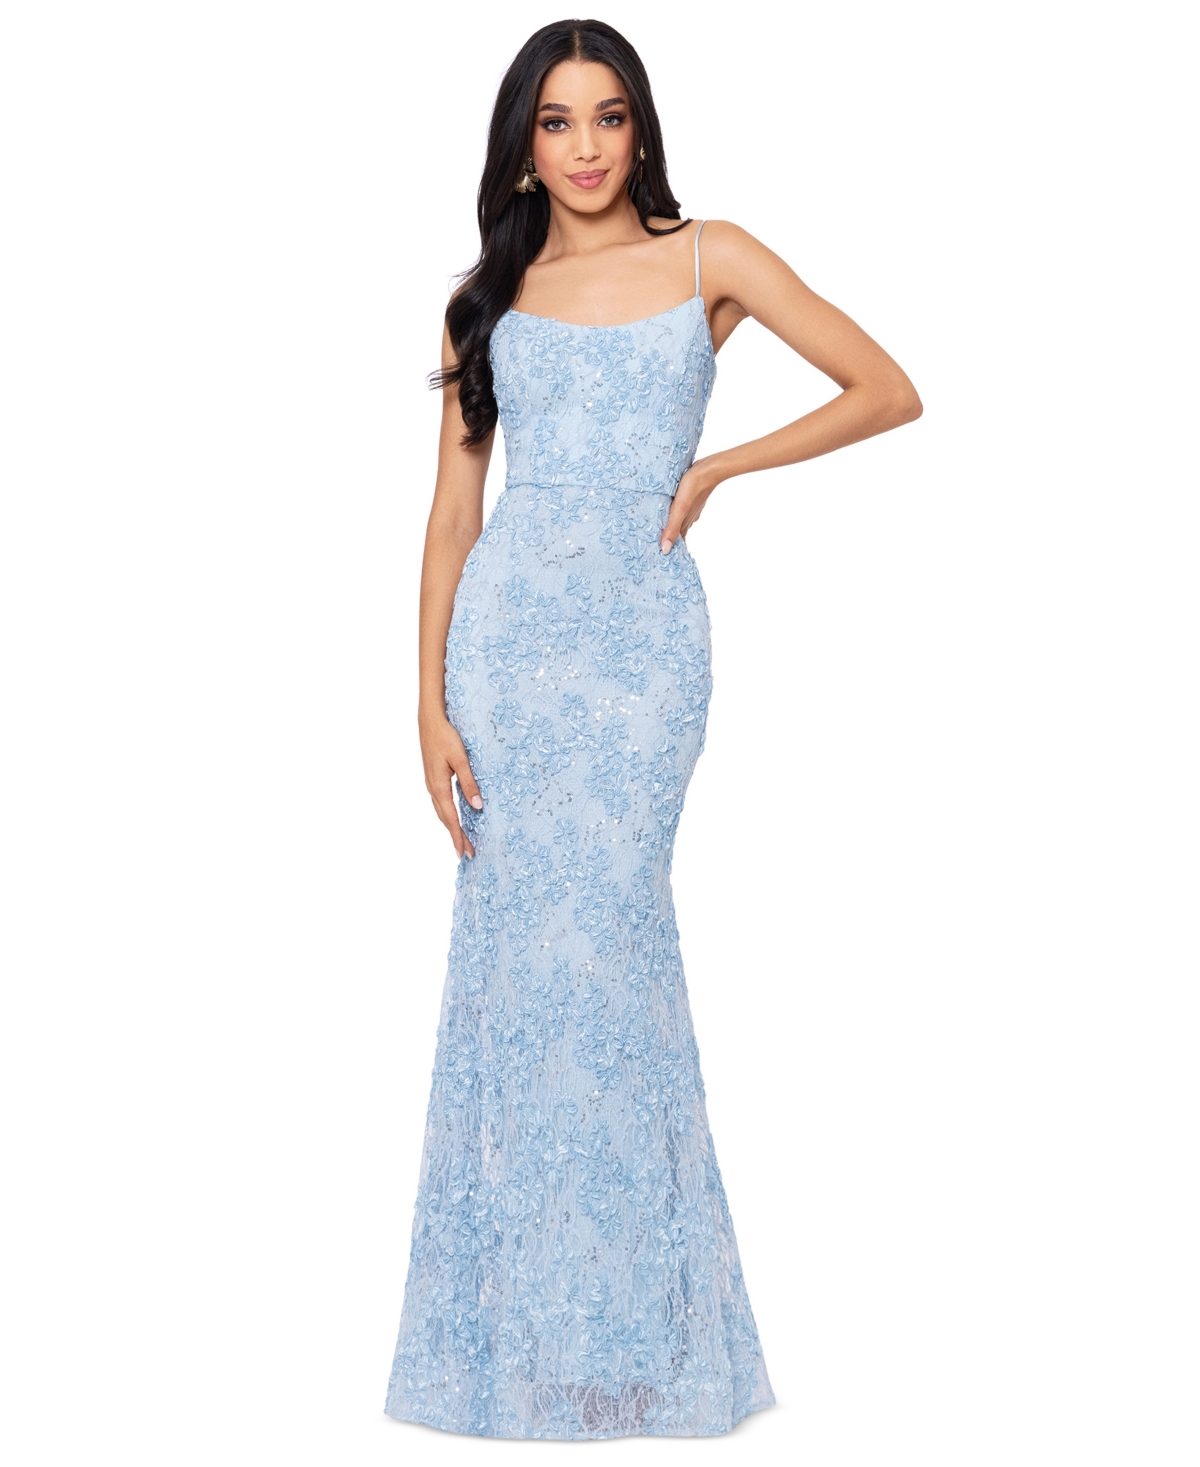 Women's Straight-Neck Sleeveless Lace Gown - Blue